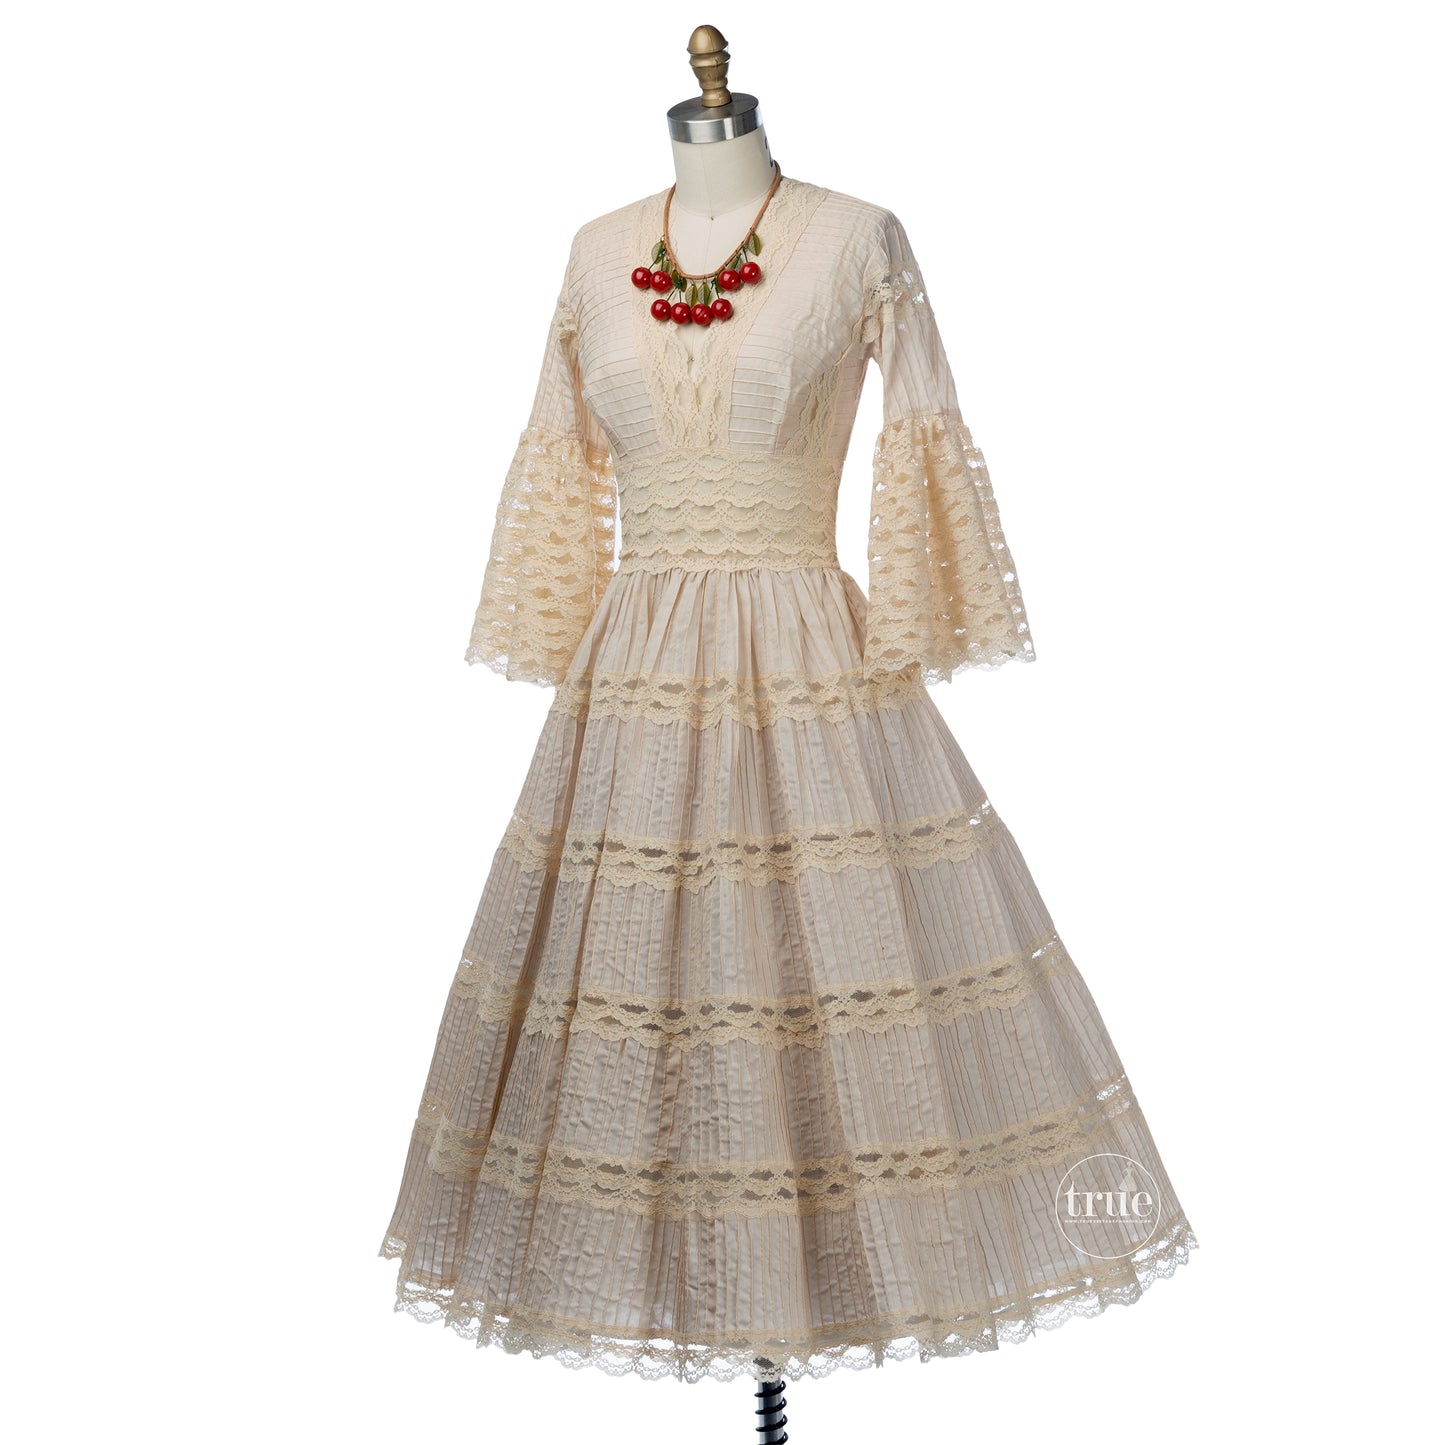 vintage 1940's dress ...classic Mexican pintucks and lace nude cotton full skirt dress